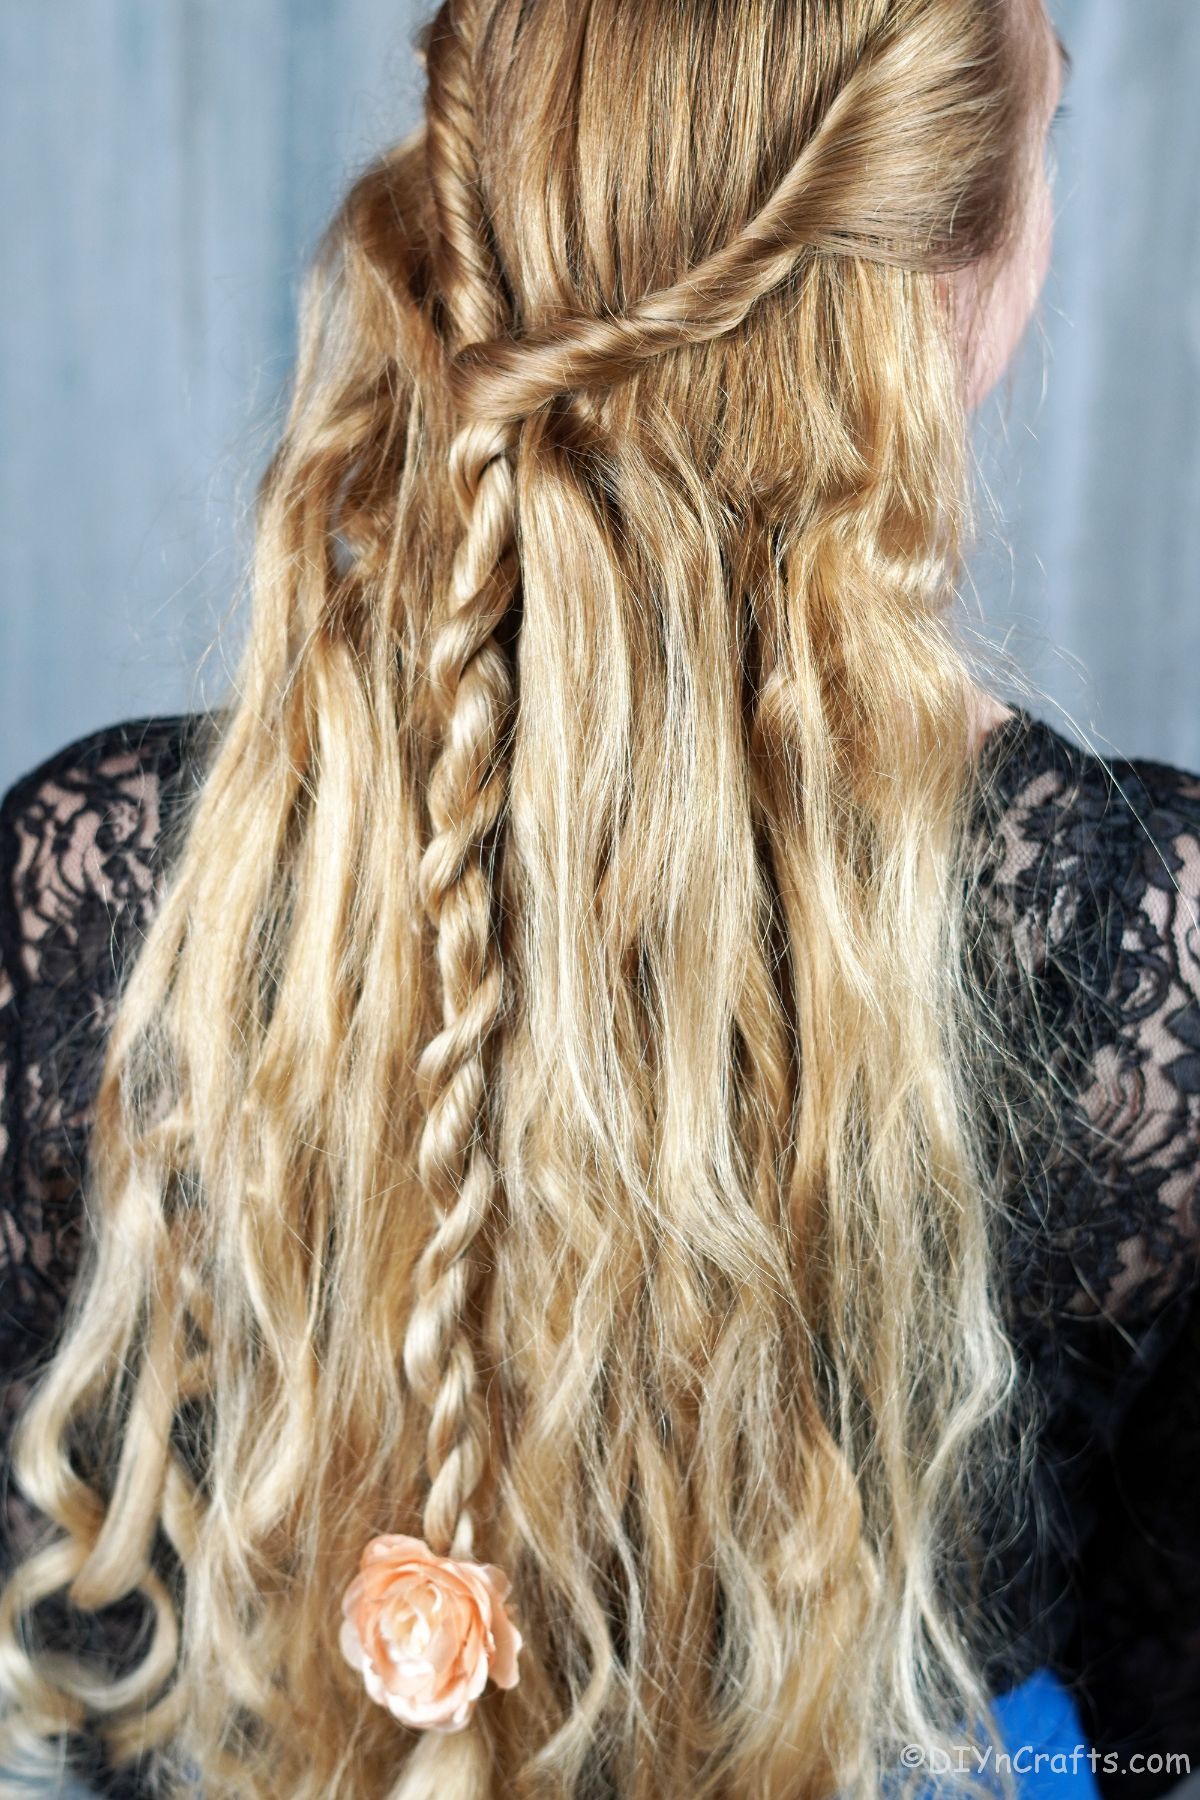 braid hanging down back of half up hairstyle